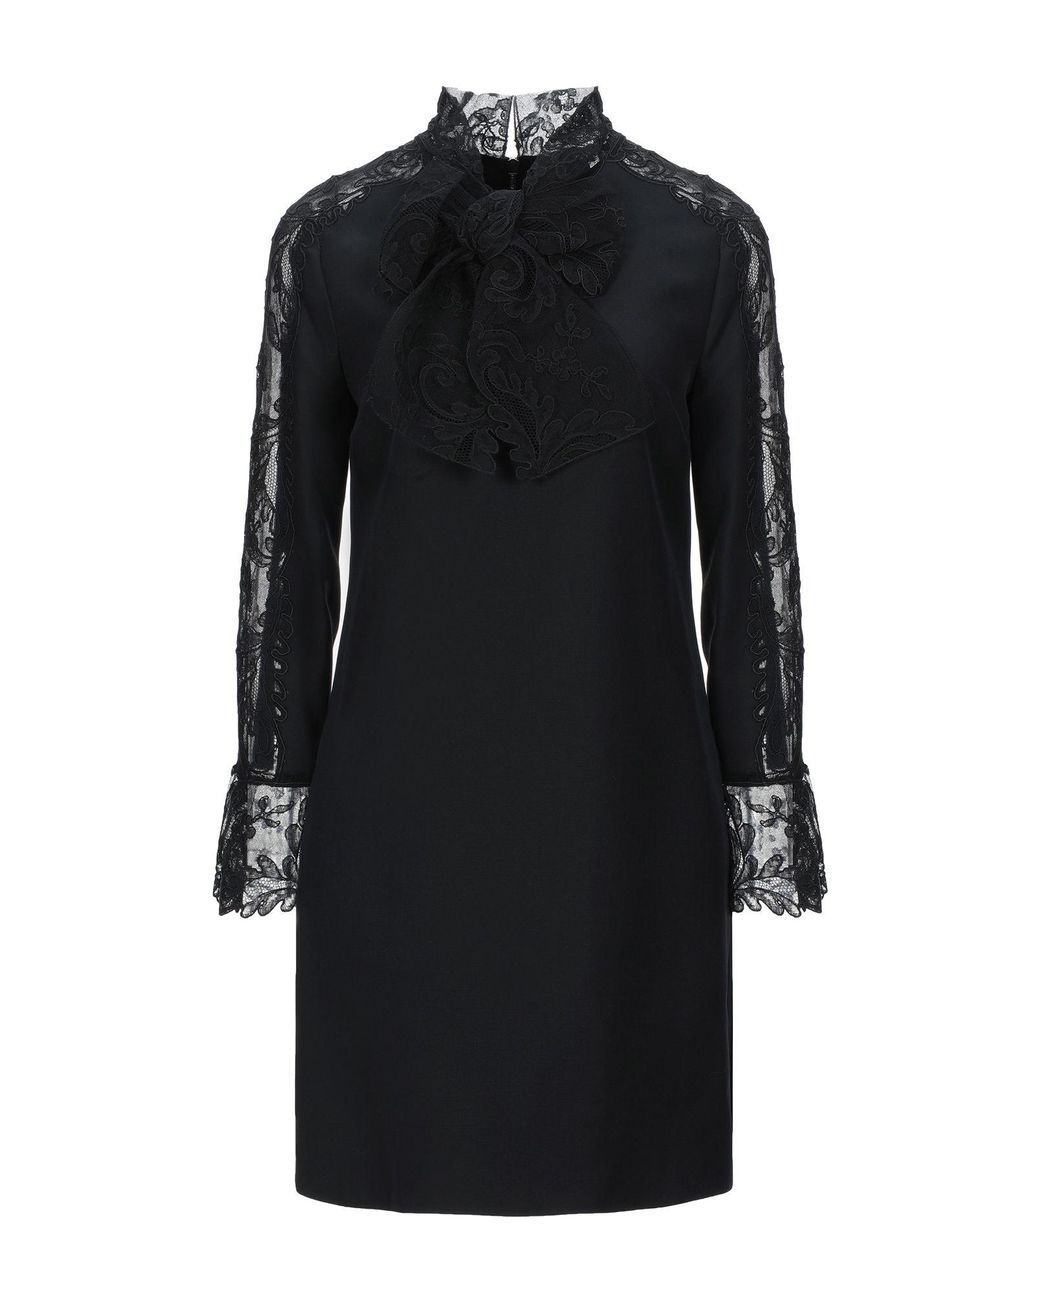 Gucci Lace Short Dress in Black - Lyst